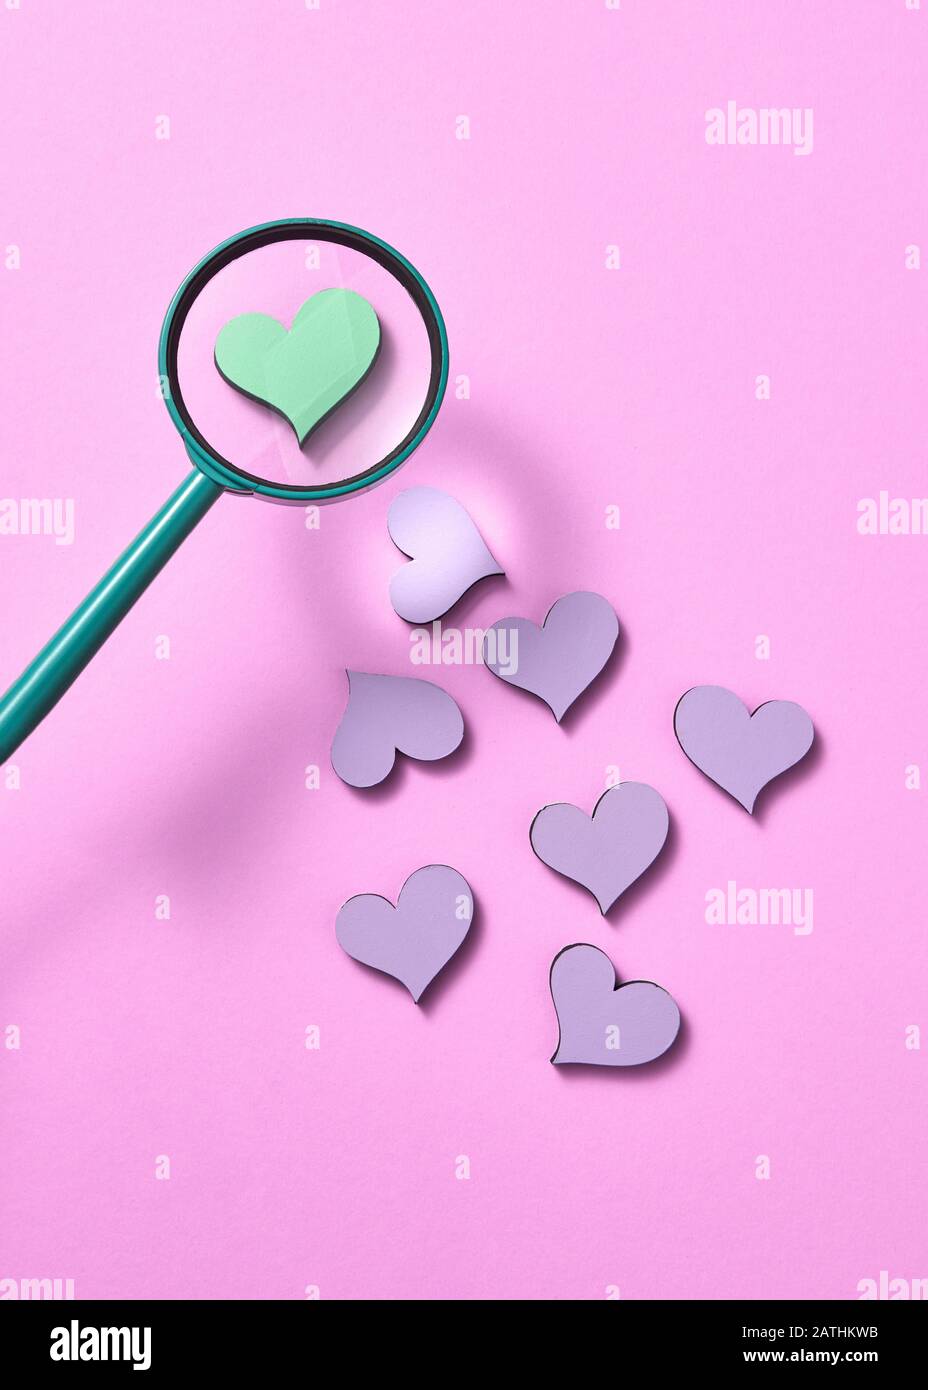 Hearts Love Stock Photos and Images - 123RF